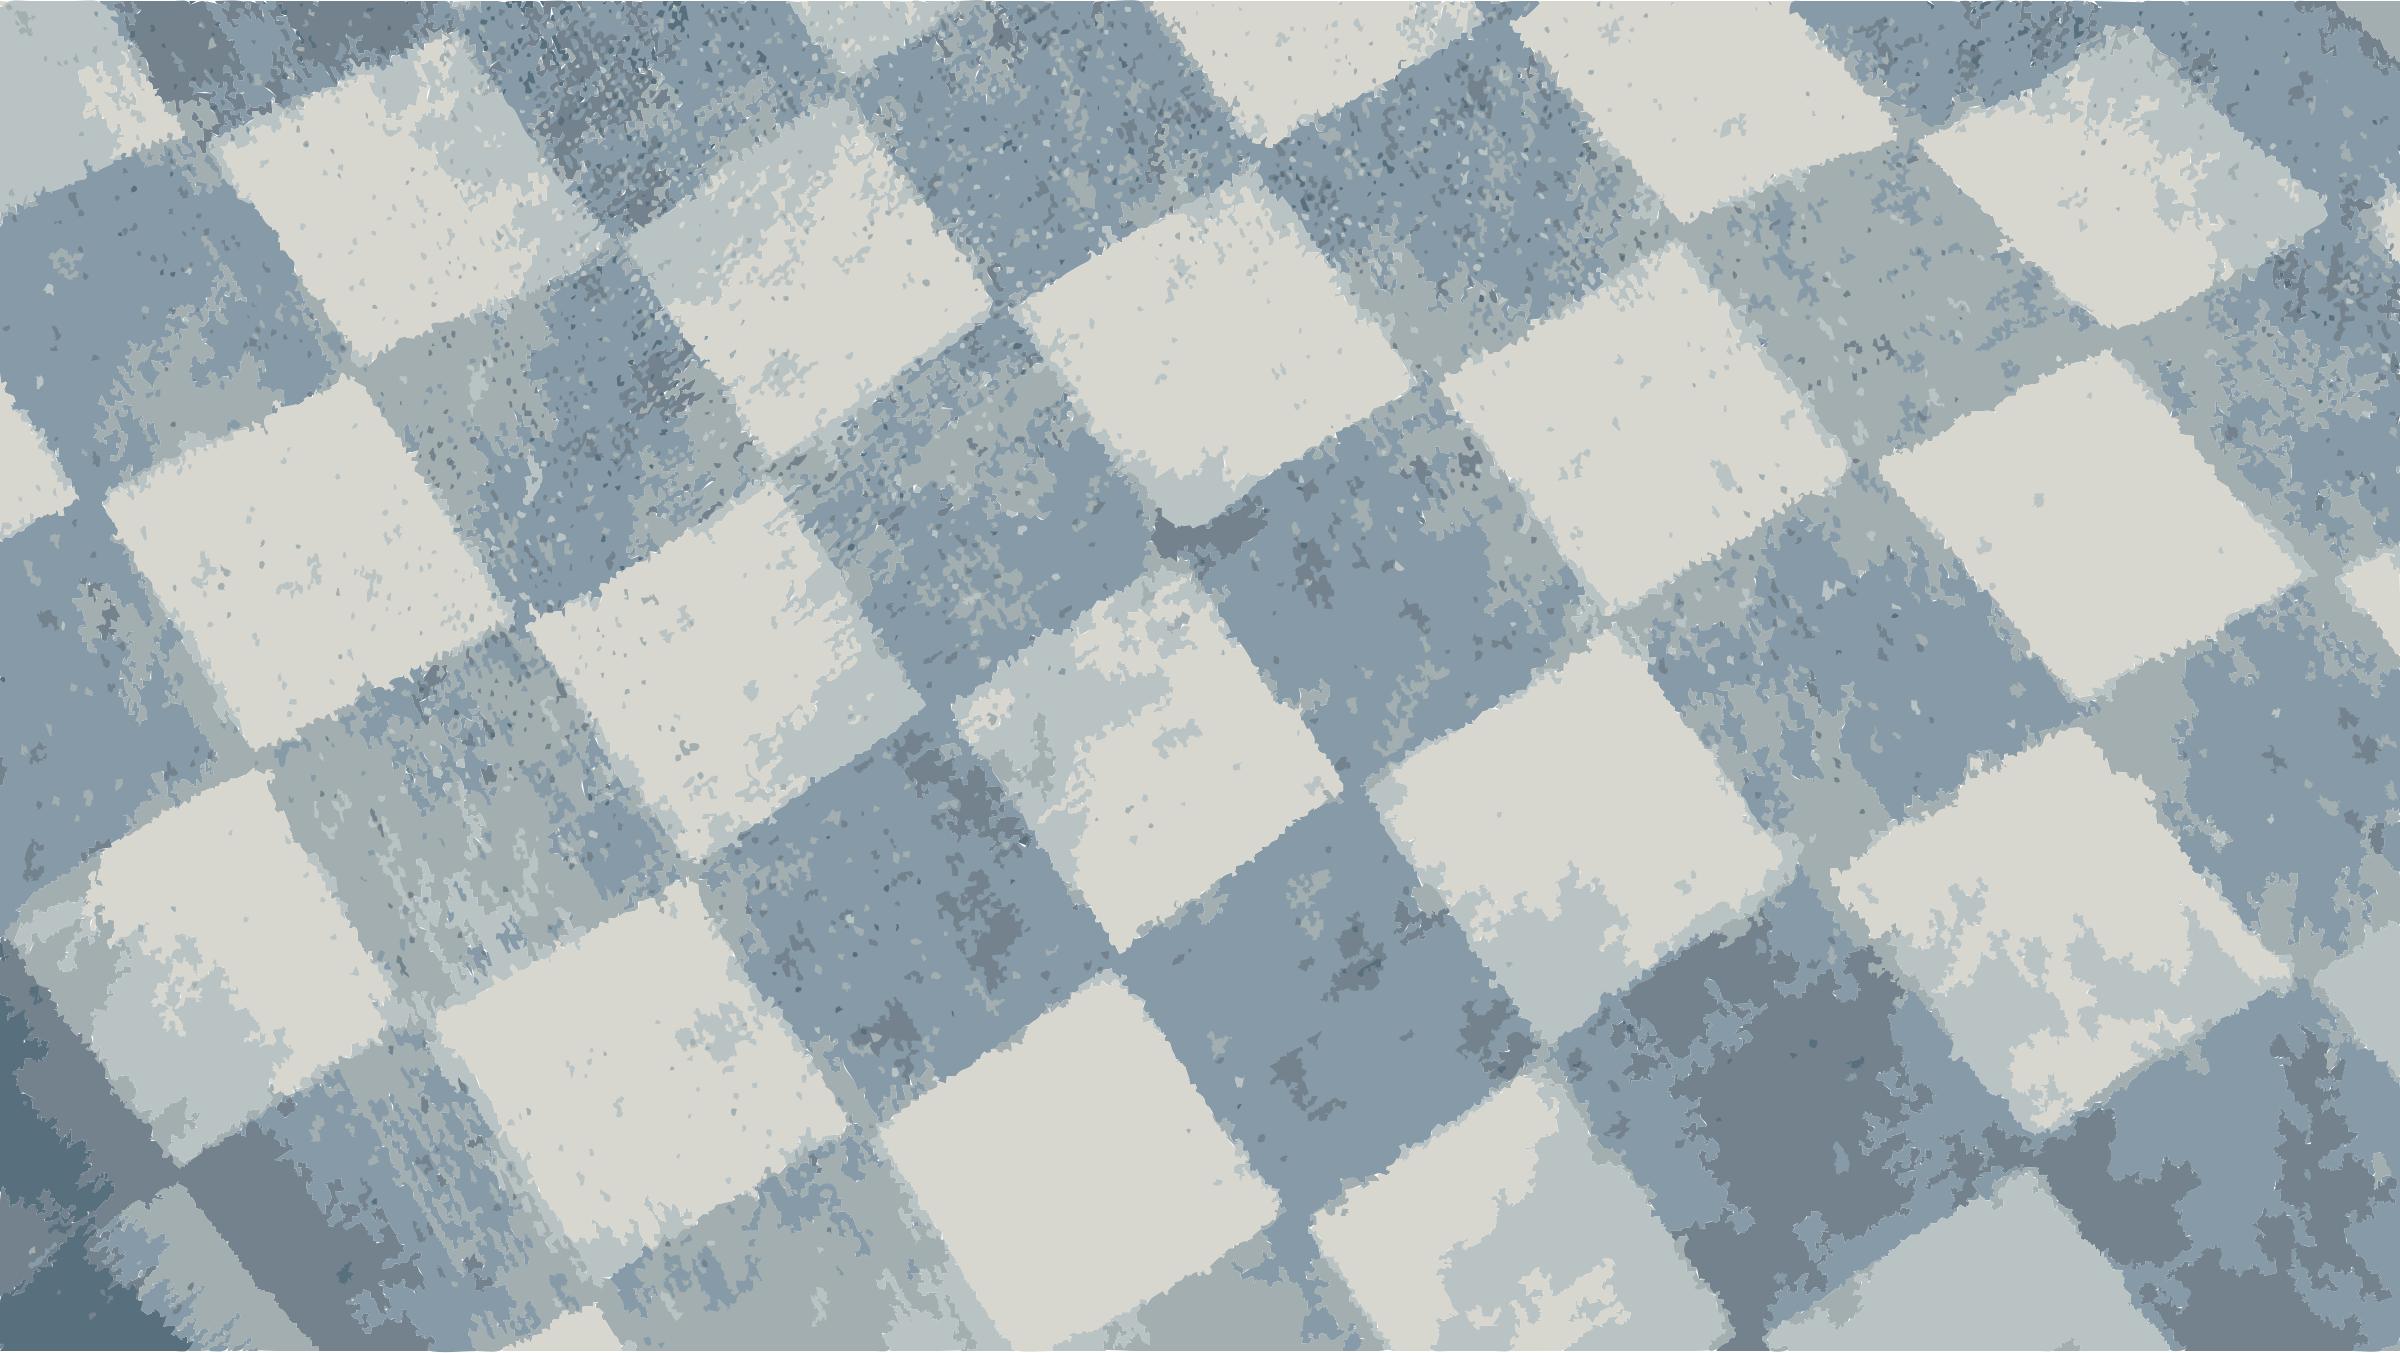 Flat checker pattern in blue and white icons